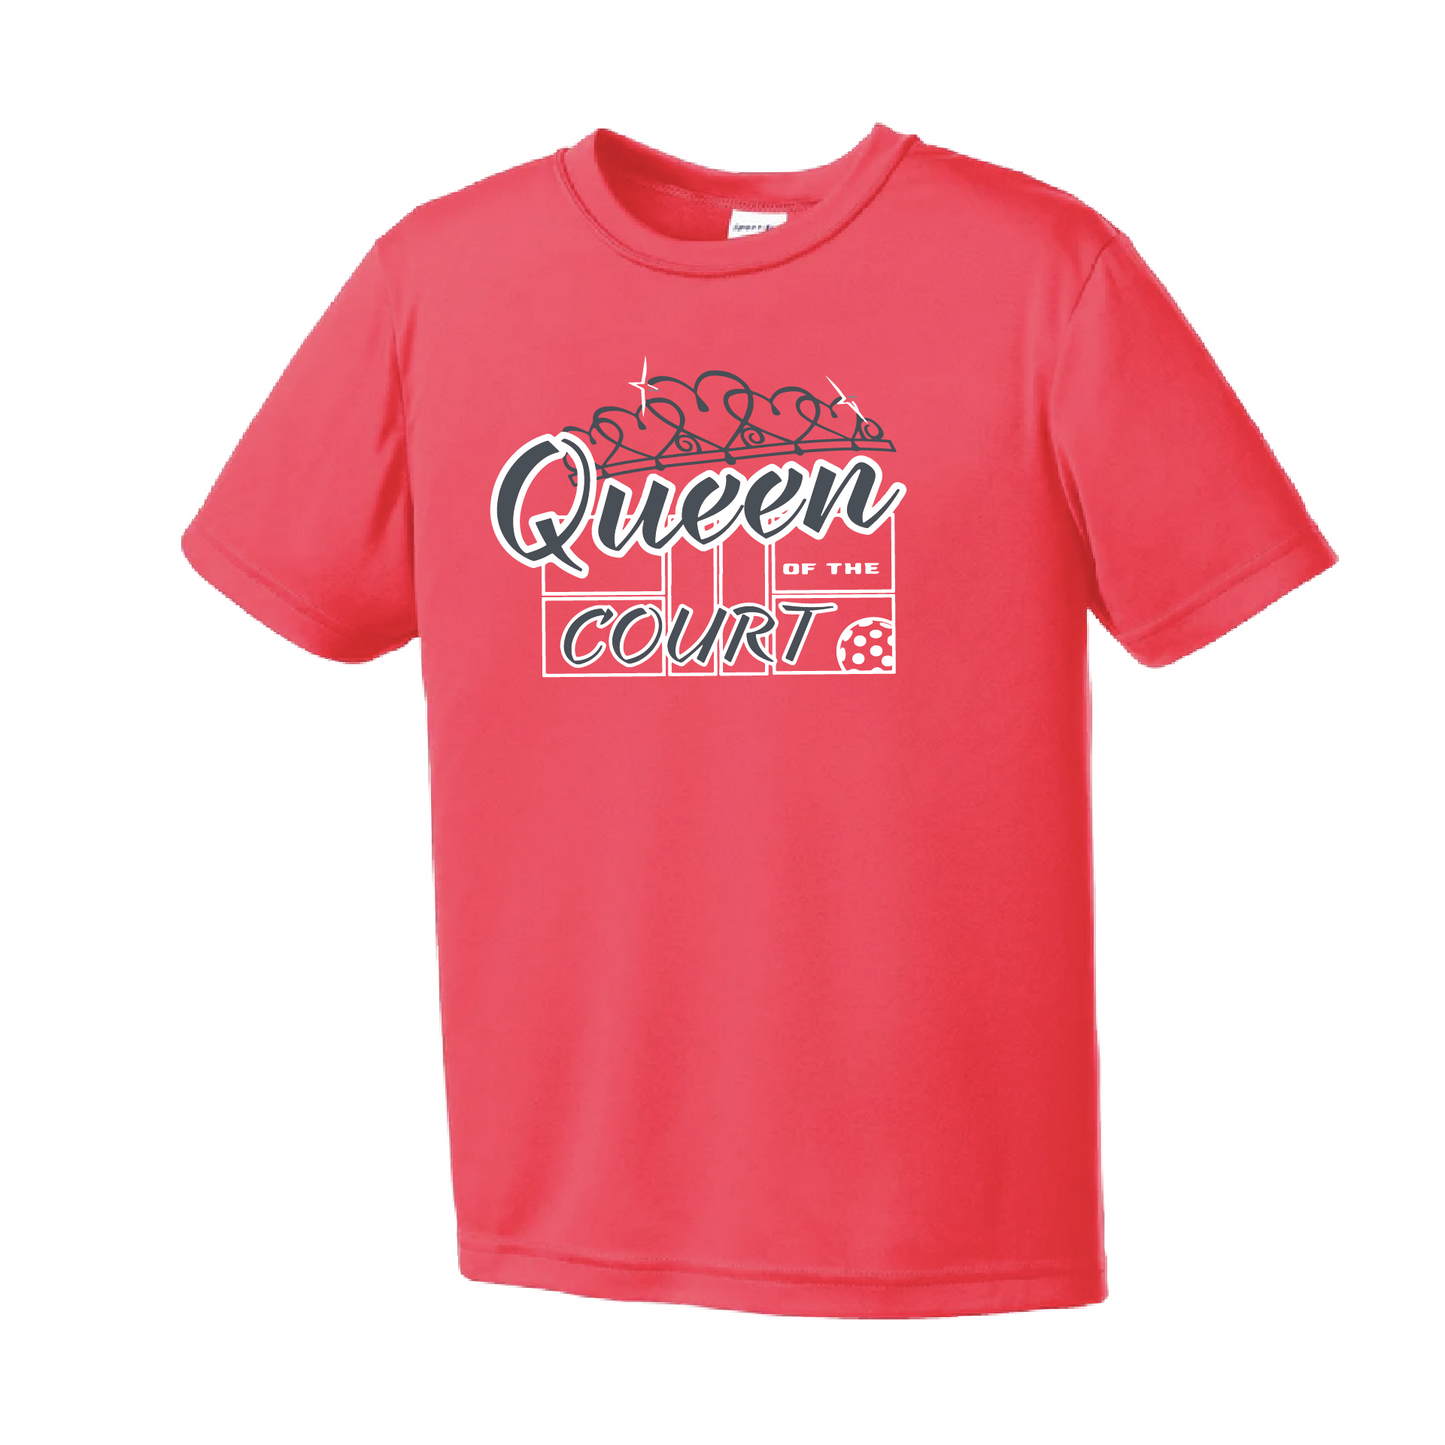 Pickleball Design: Queen of the Court  Youth Style: Short Sleeve  Shirts are lightweight, roomy and highly breathable. These moisture-wicking shirts are designed for athletic performance. They feature PosiCharge technology to lock in color and prevent logos from fading. Removable tag and set-in sleeves for comfort.